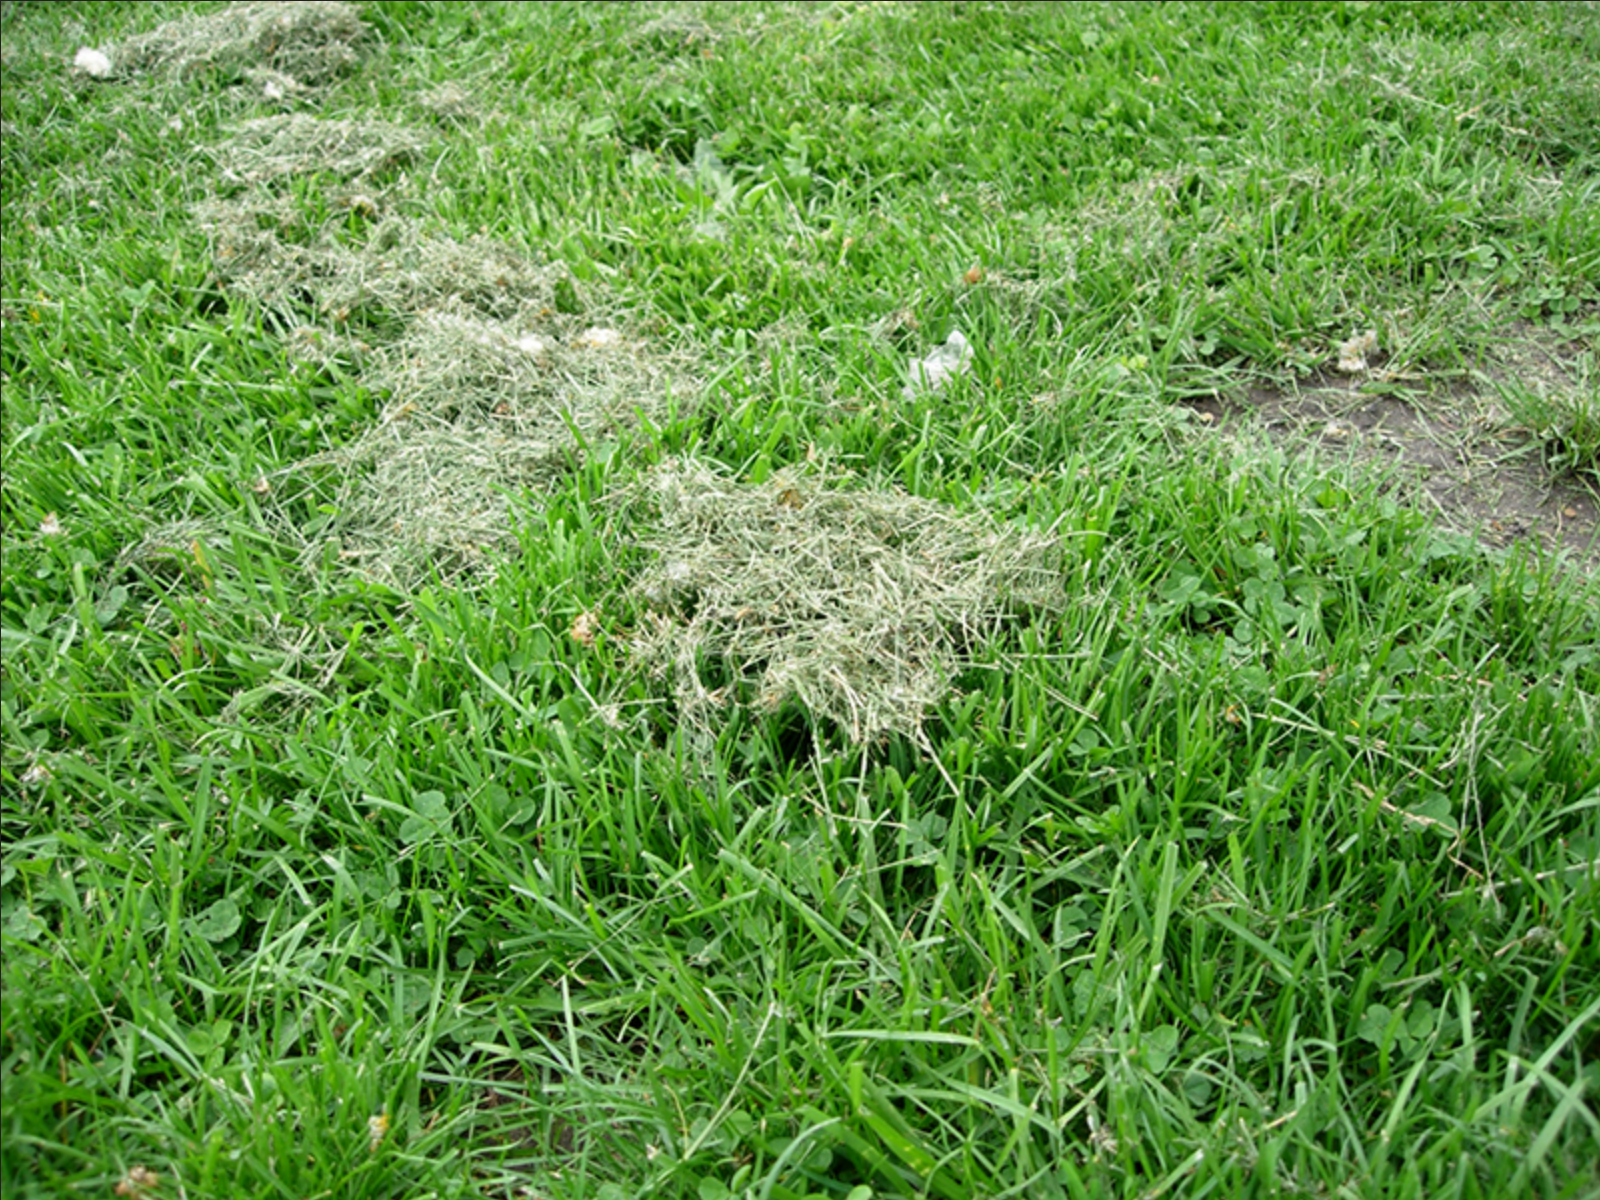 Excess grass clippings